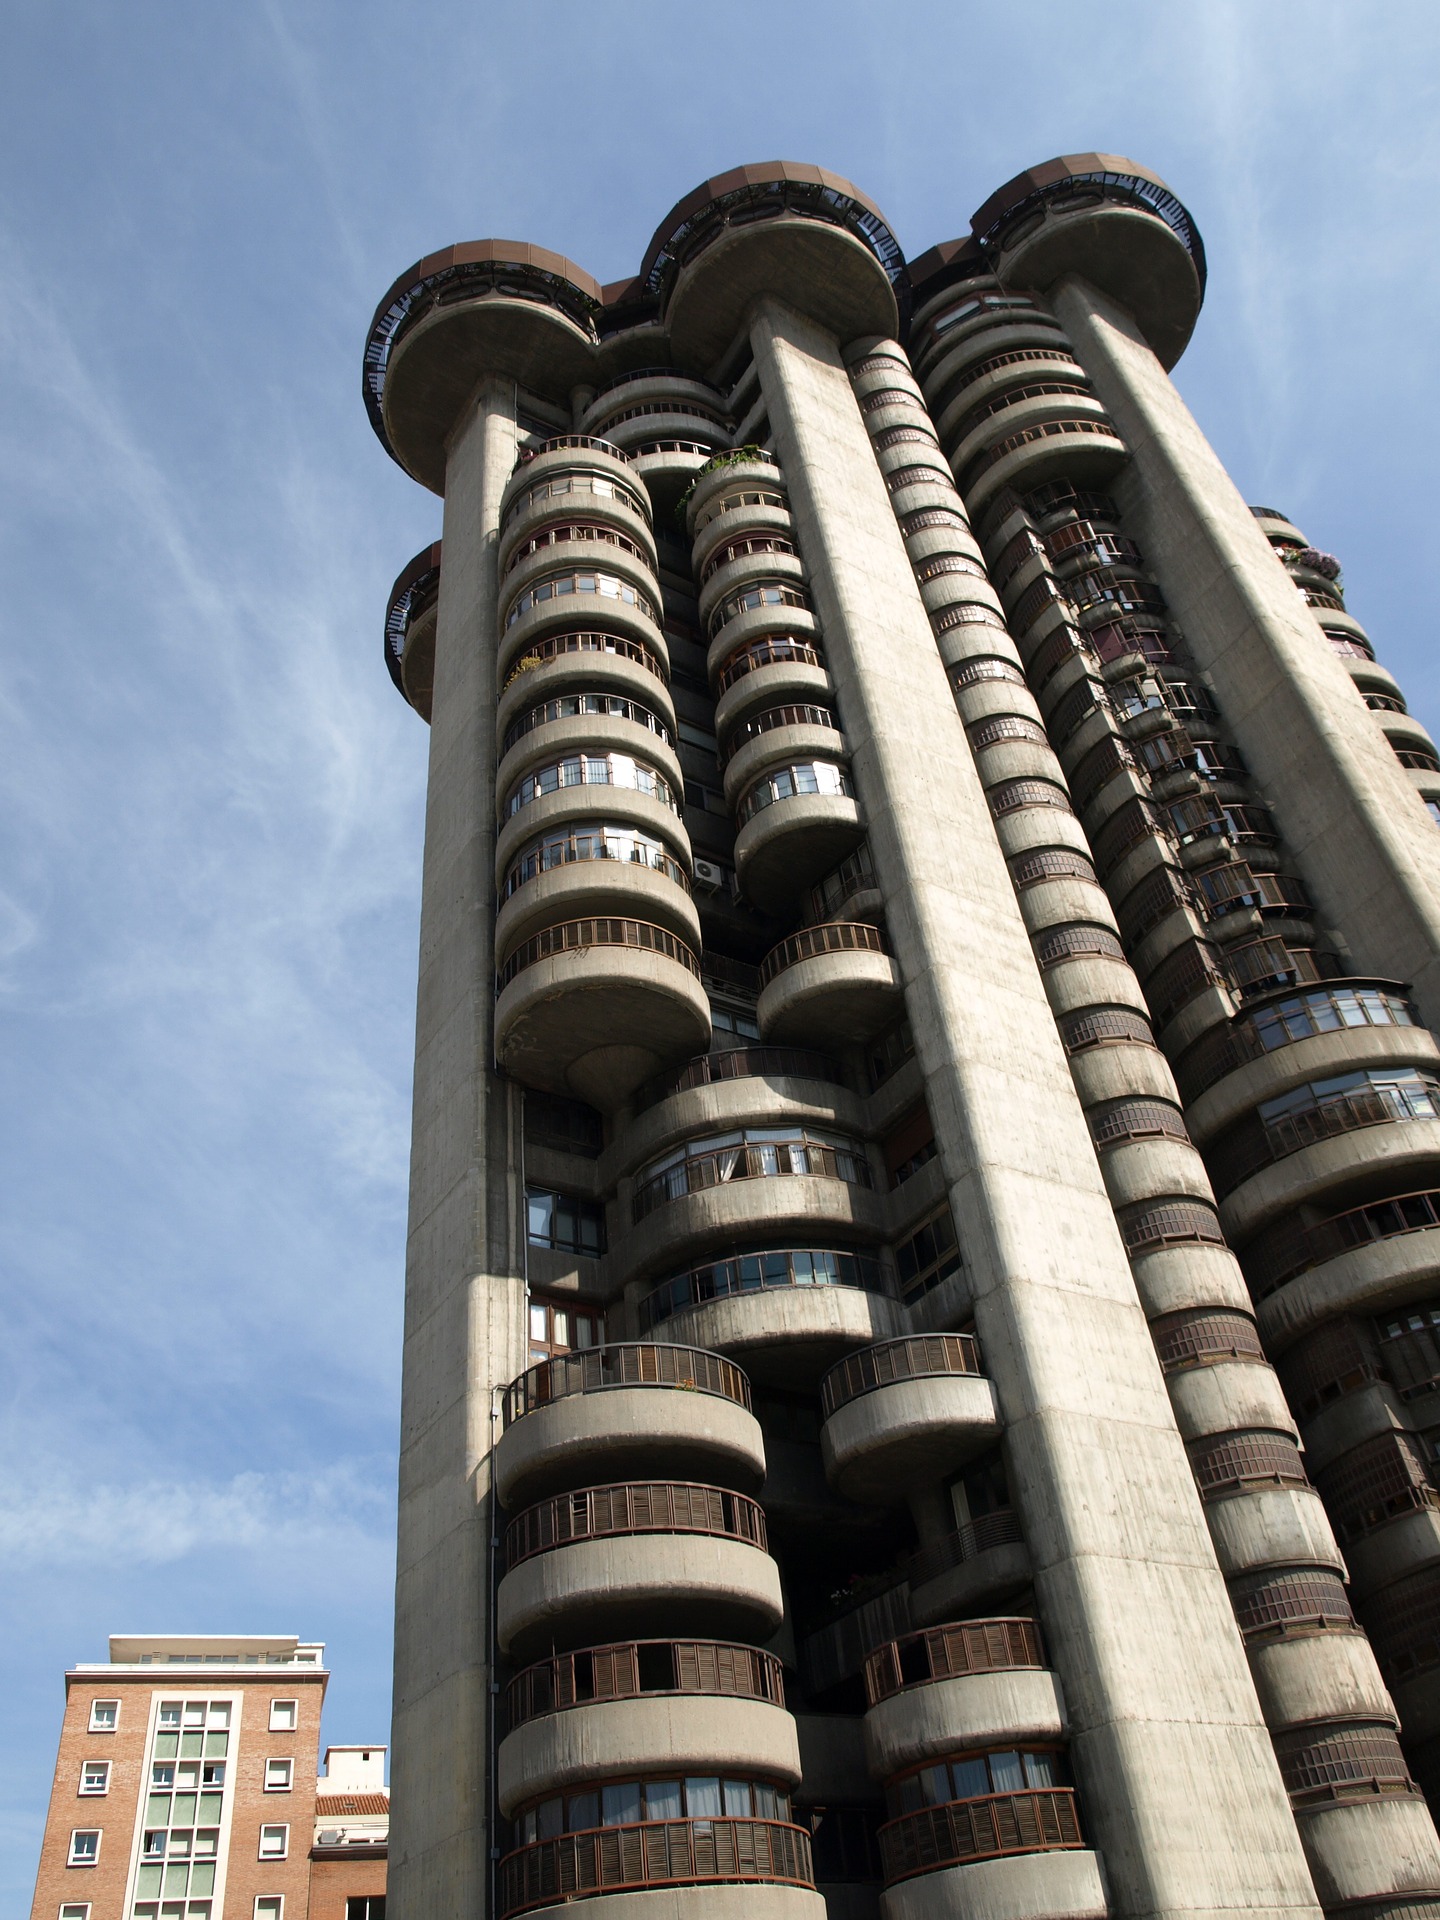 Torres Blancas aka White Towers in Madrid - an architectural icon of the Spanish Organicism movement